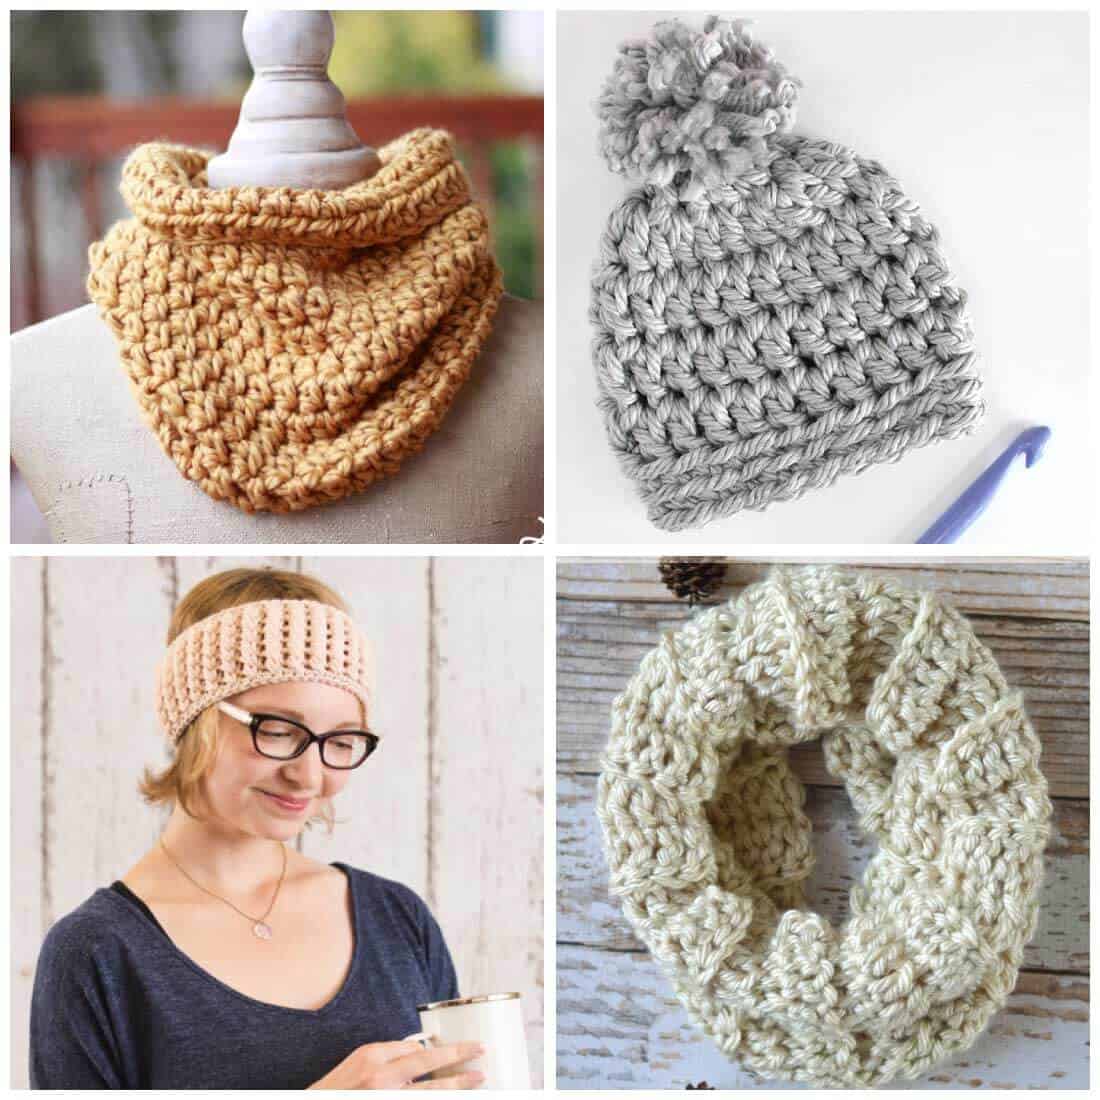 easy crochet patterns | quick crochet patterns | fast crochet projects | free crochet patterns | Daisy Cottage Designs has compiled this adorable collection of crochet patterns that are both quick and easy to make! Use them to make gifts for friends or goodies for yourself!